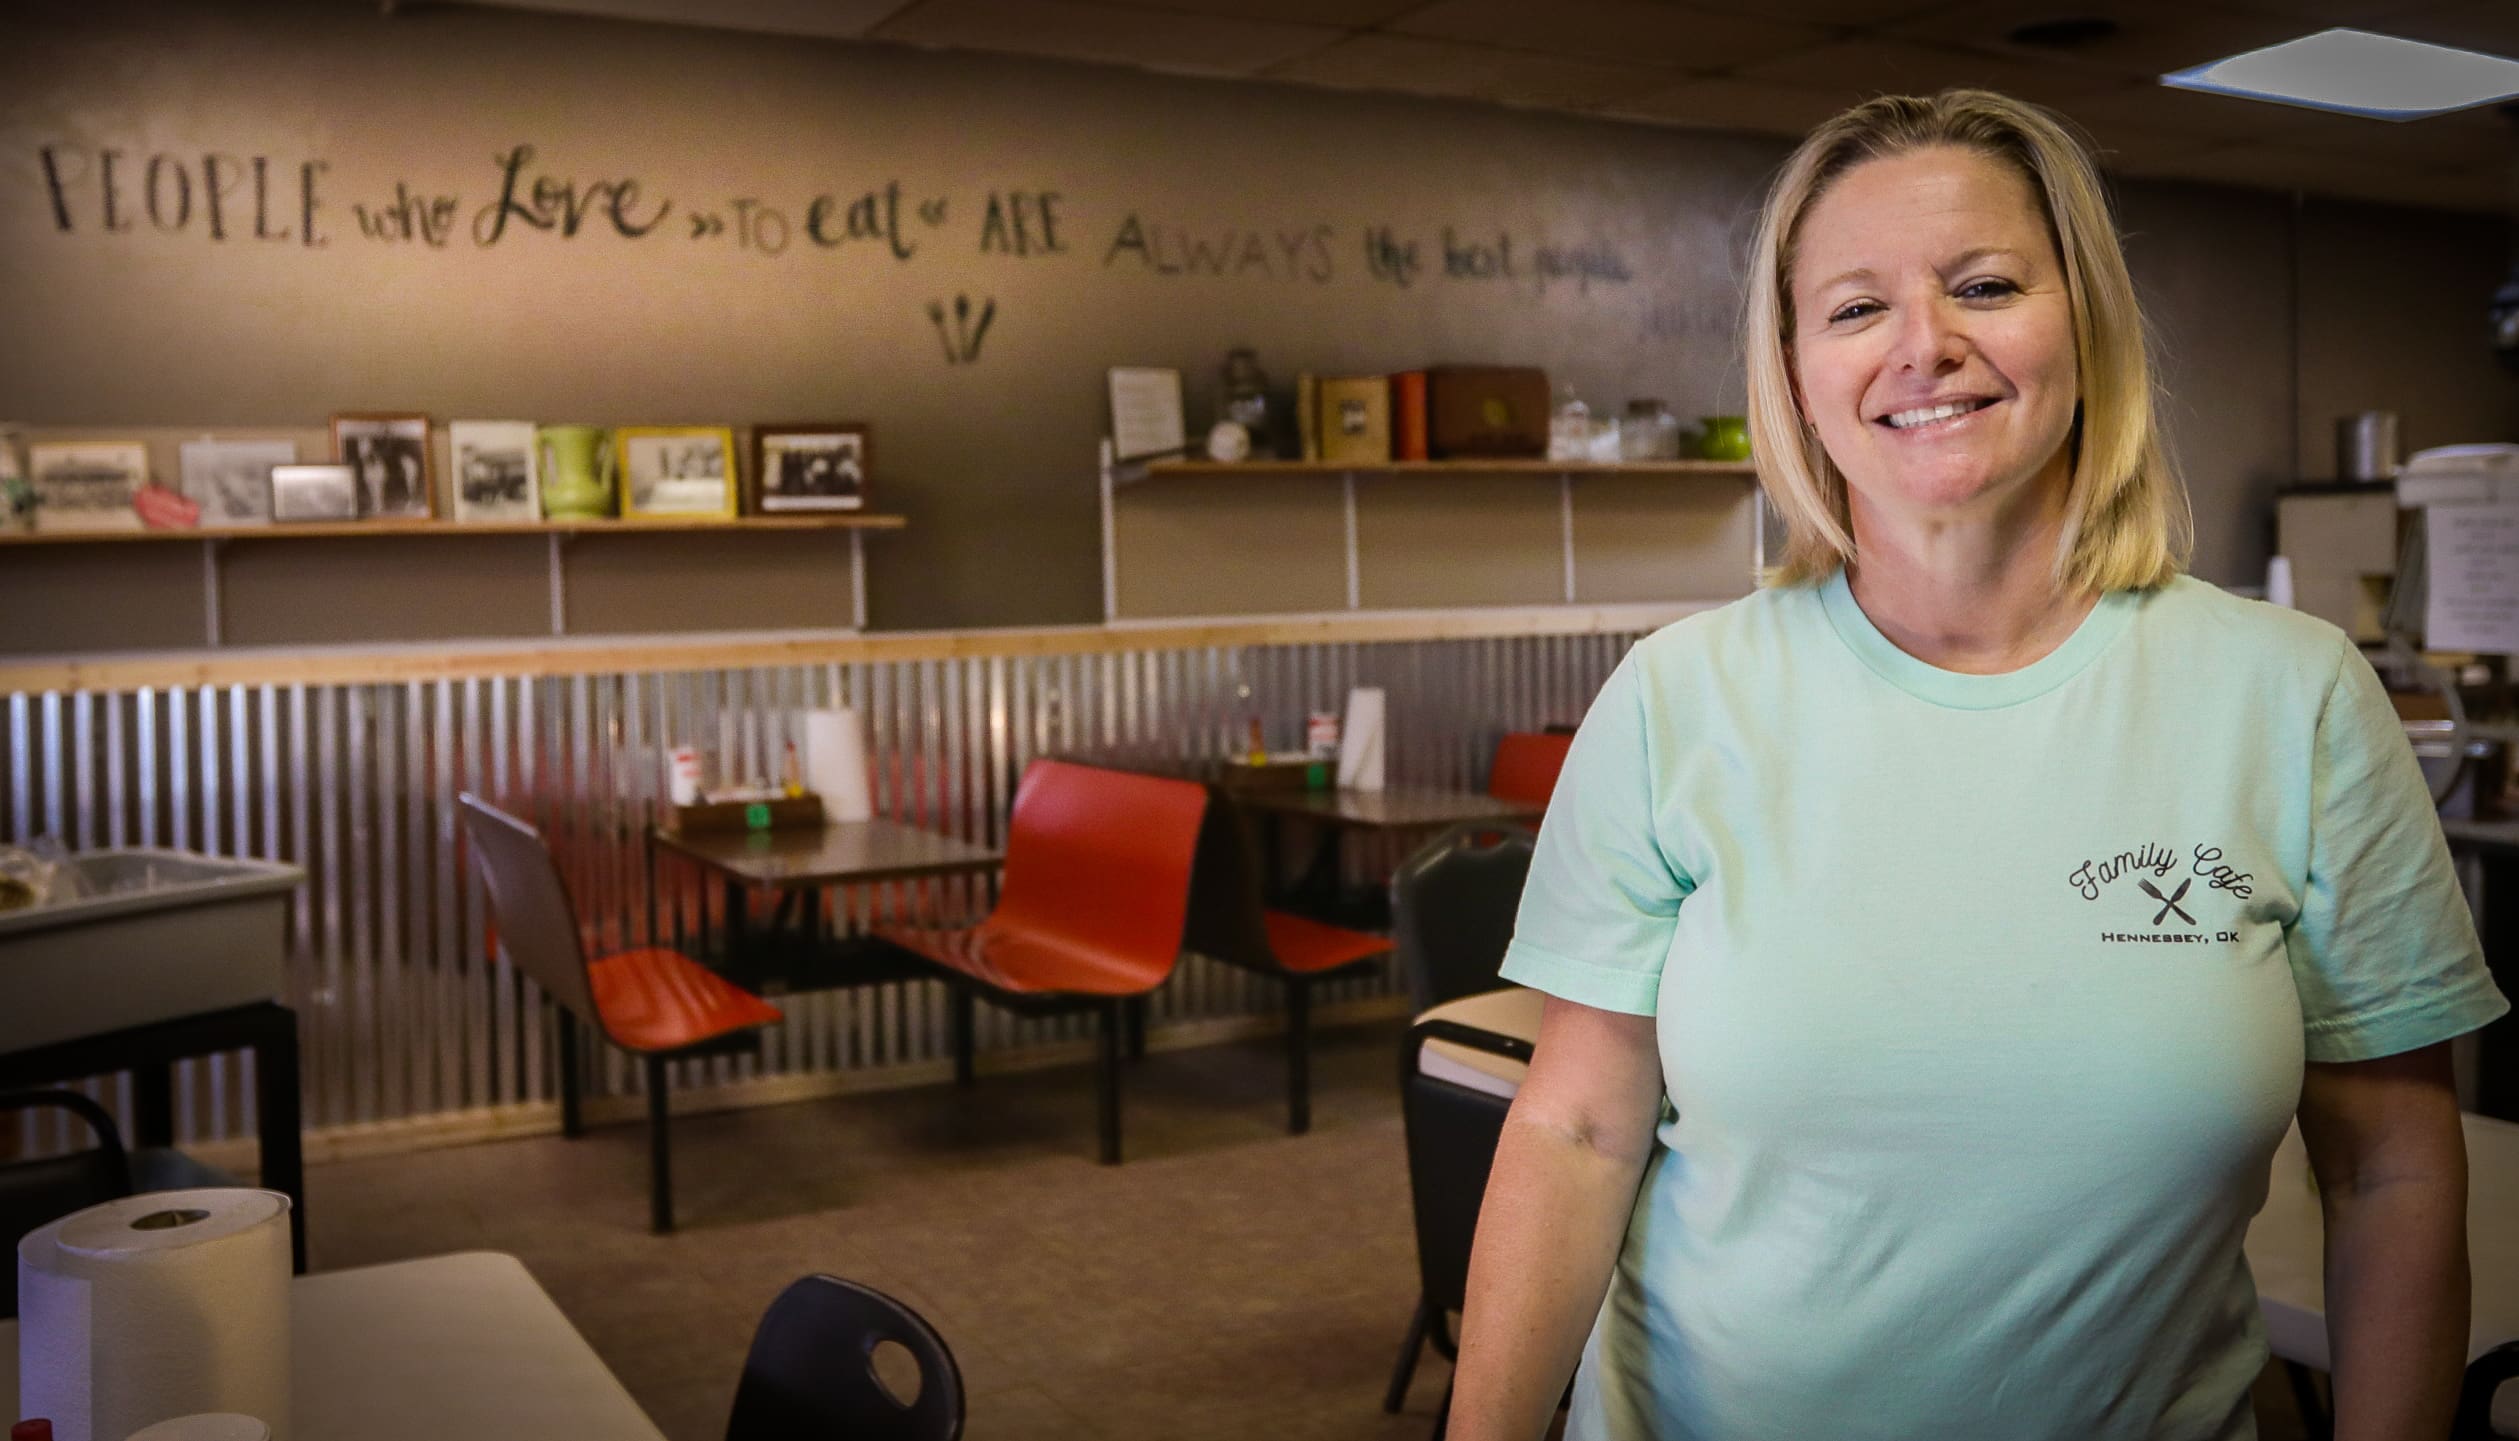 THIS WEEK ALL ABOUT HENNESSEY RECOGNIZES SARA FISHER – FAMILY CAFÉ